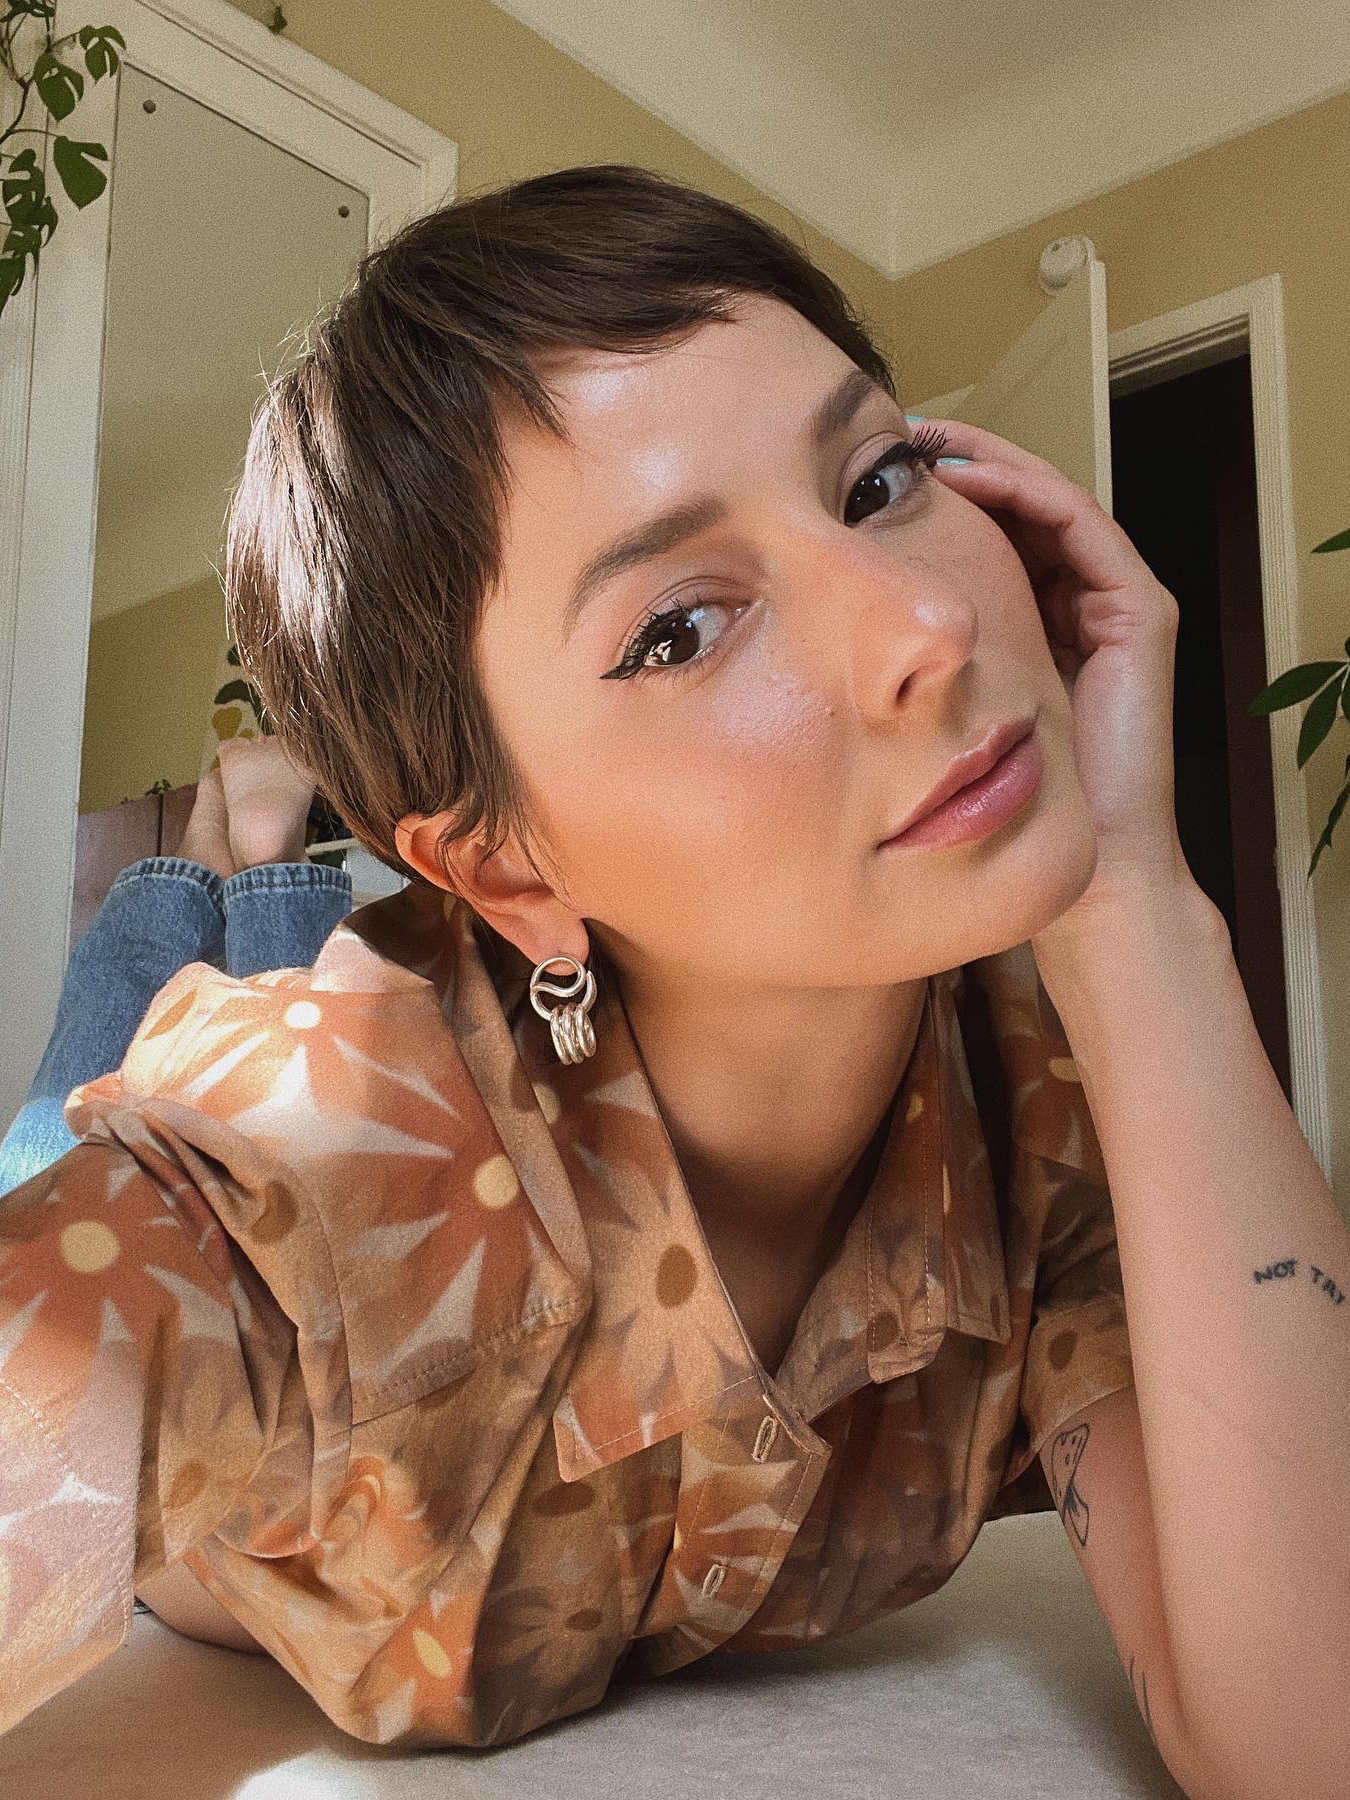 These Short Hair Trends of 2022 Are About to Be Everywhere